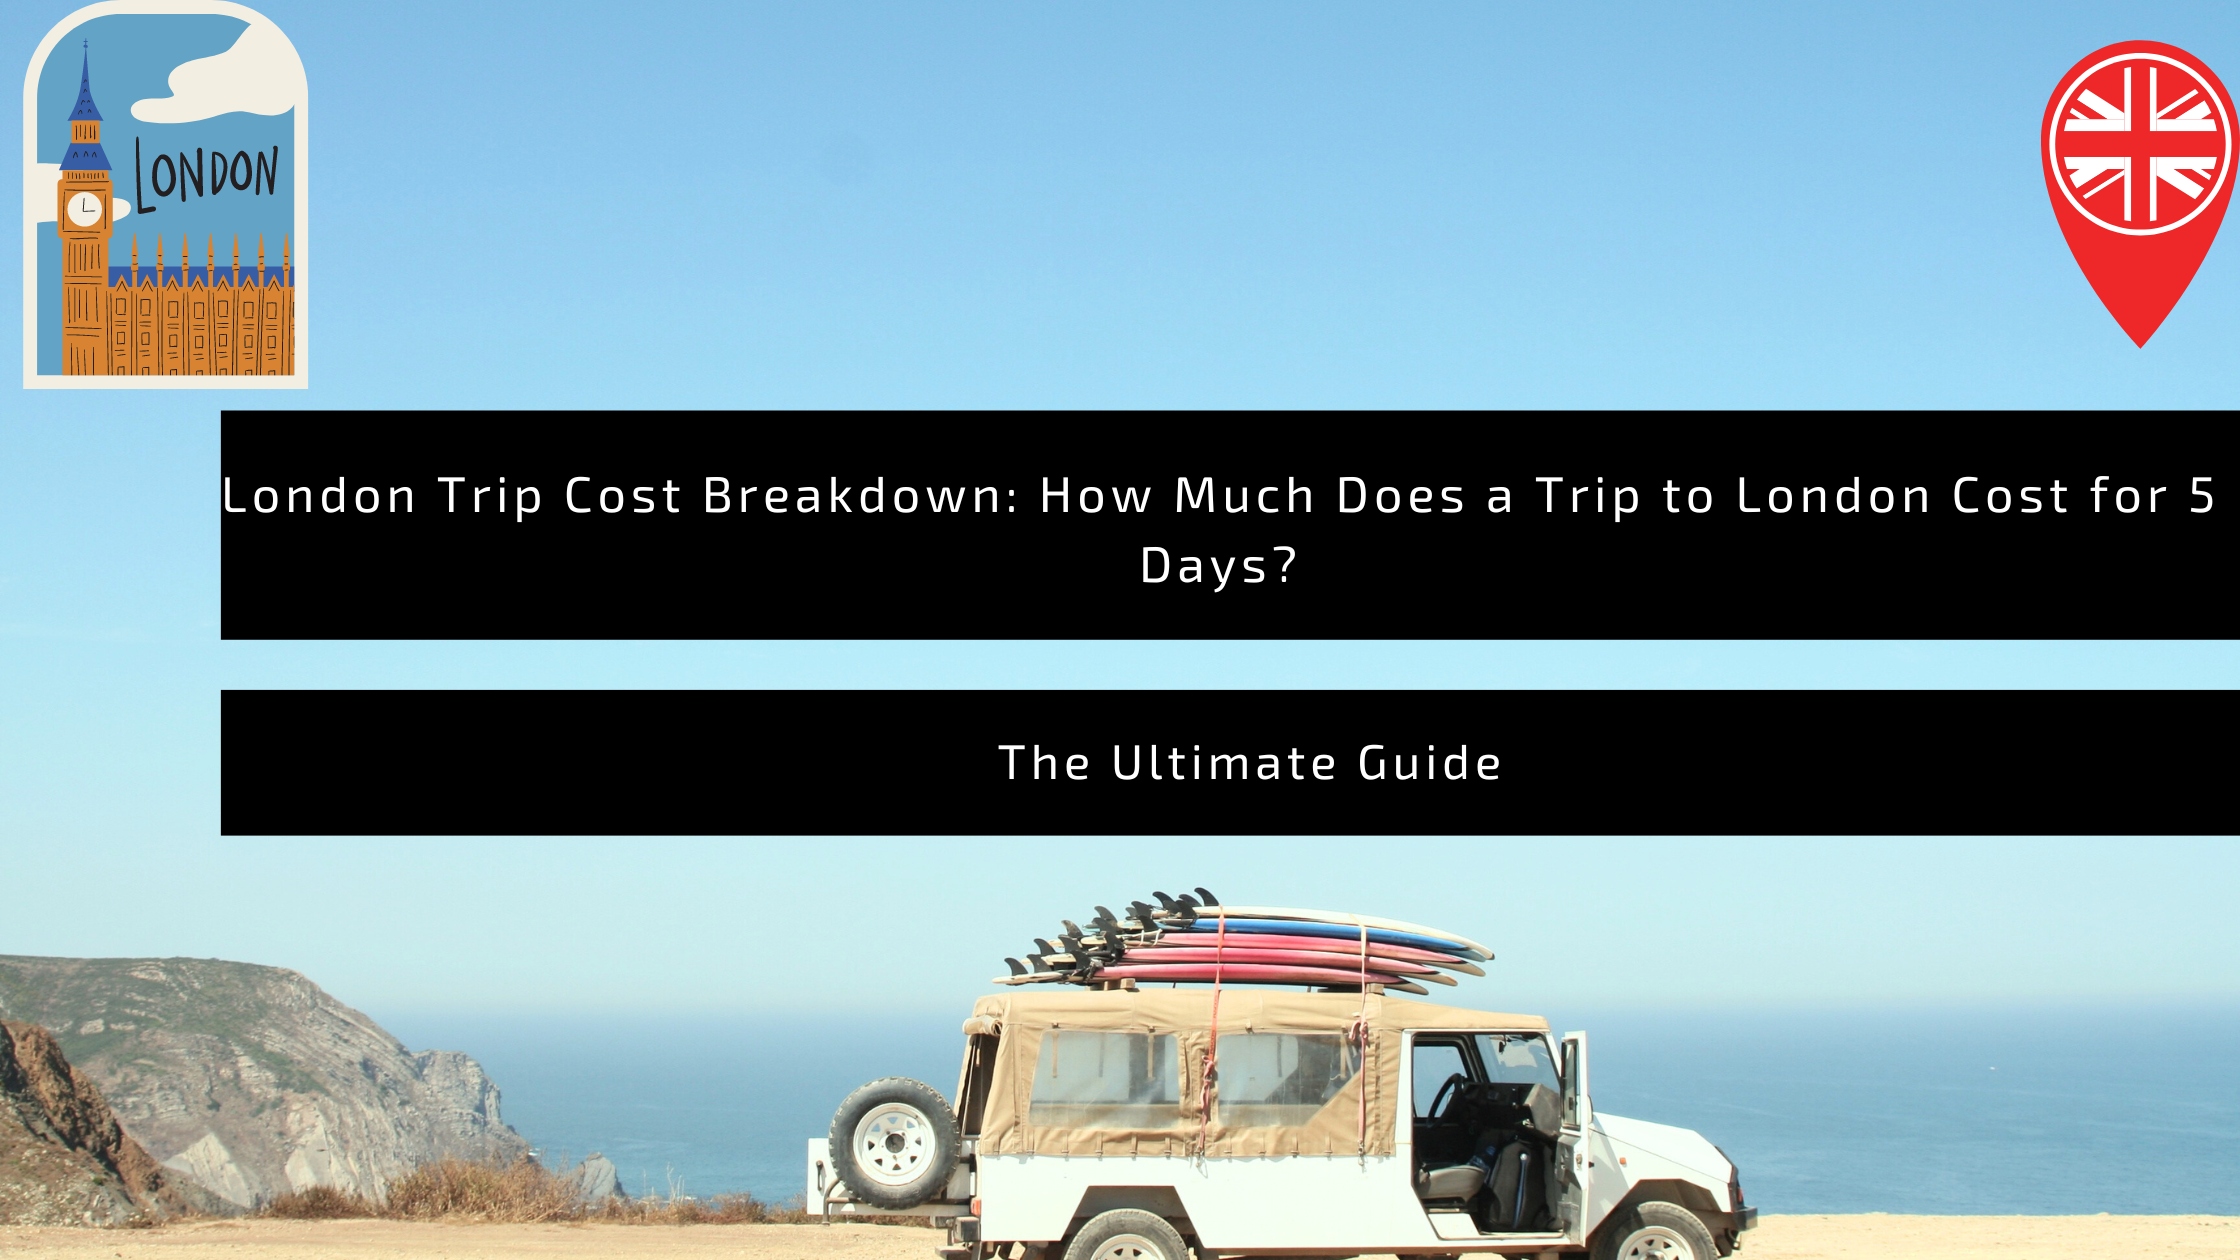 London Trip Cost Breakdown: How Much Does a Trip to London Cost for 5 Days?